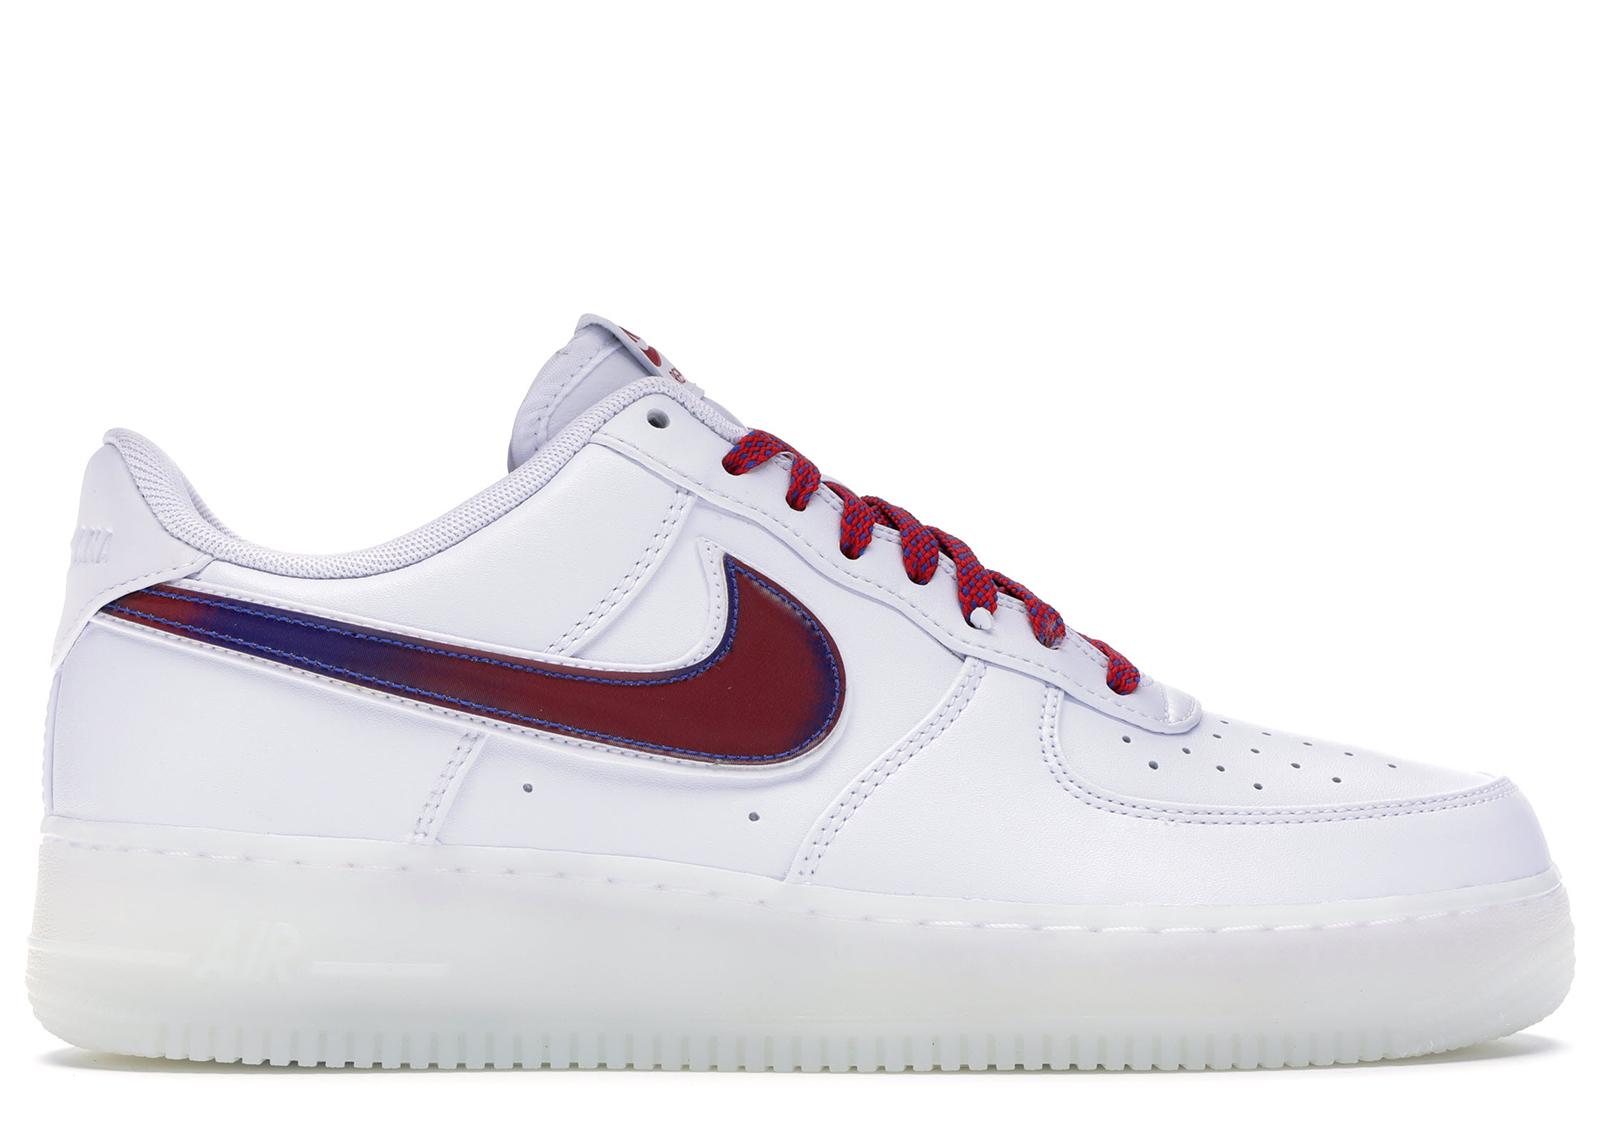 Nike Air Force 1 Low De Lo Mio in White 